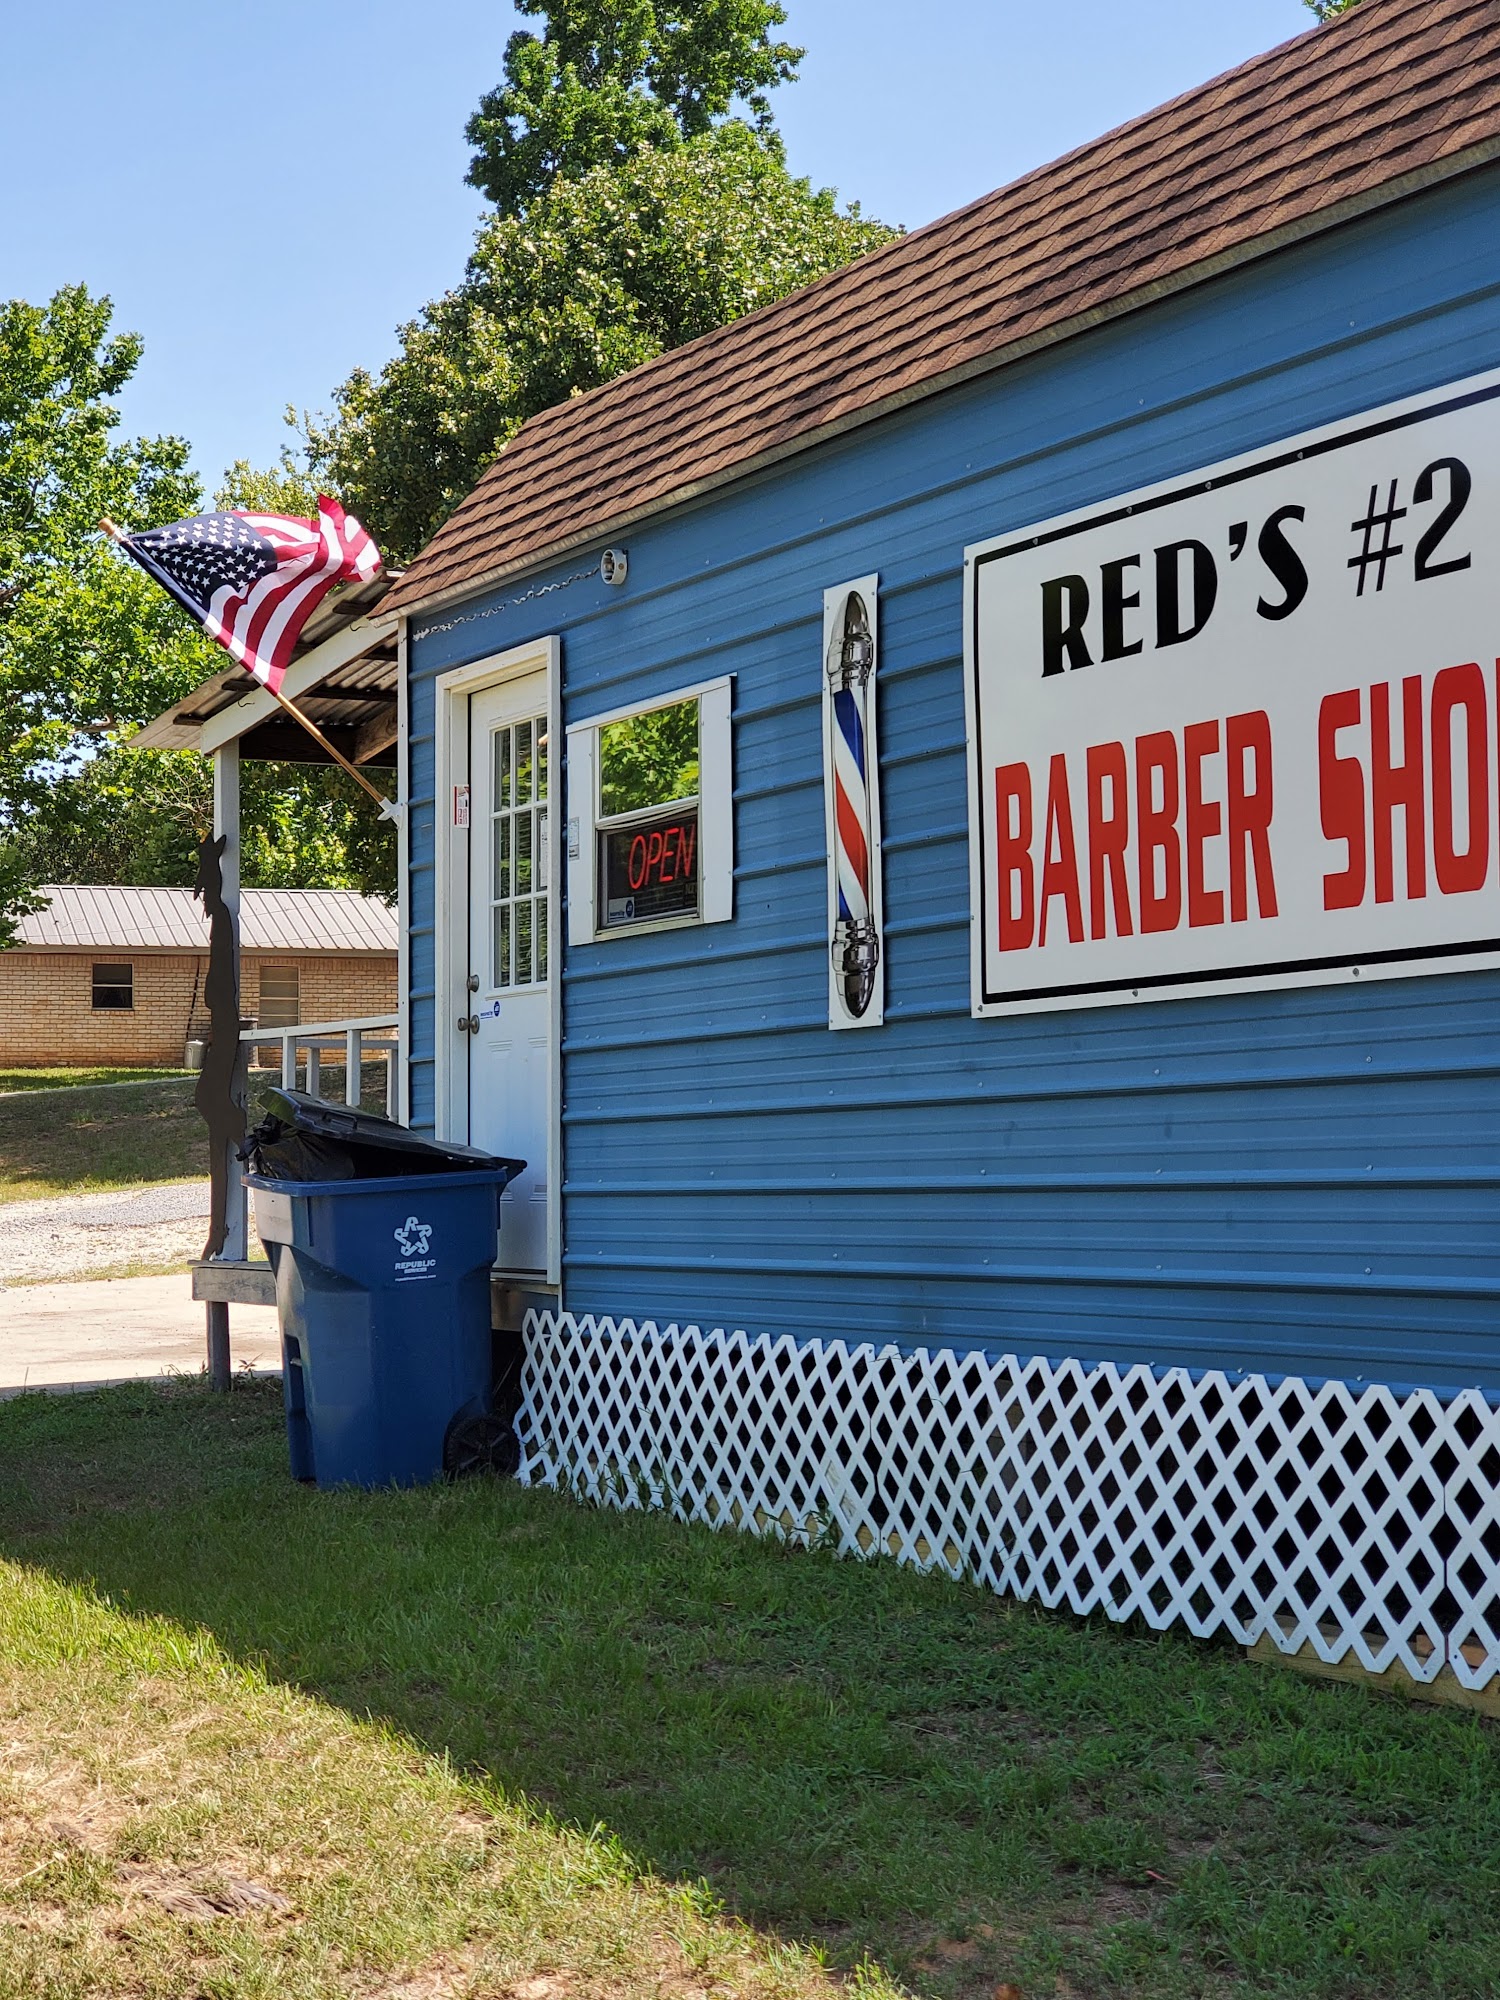 Red's Barber Shop # 2 120 Hill Ave, Centerville Texas 75833